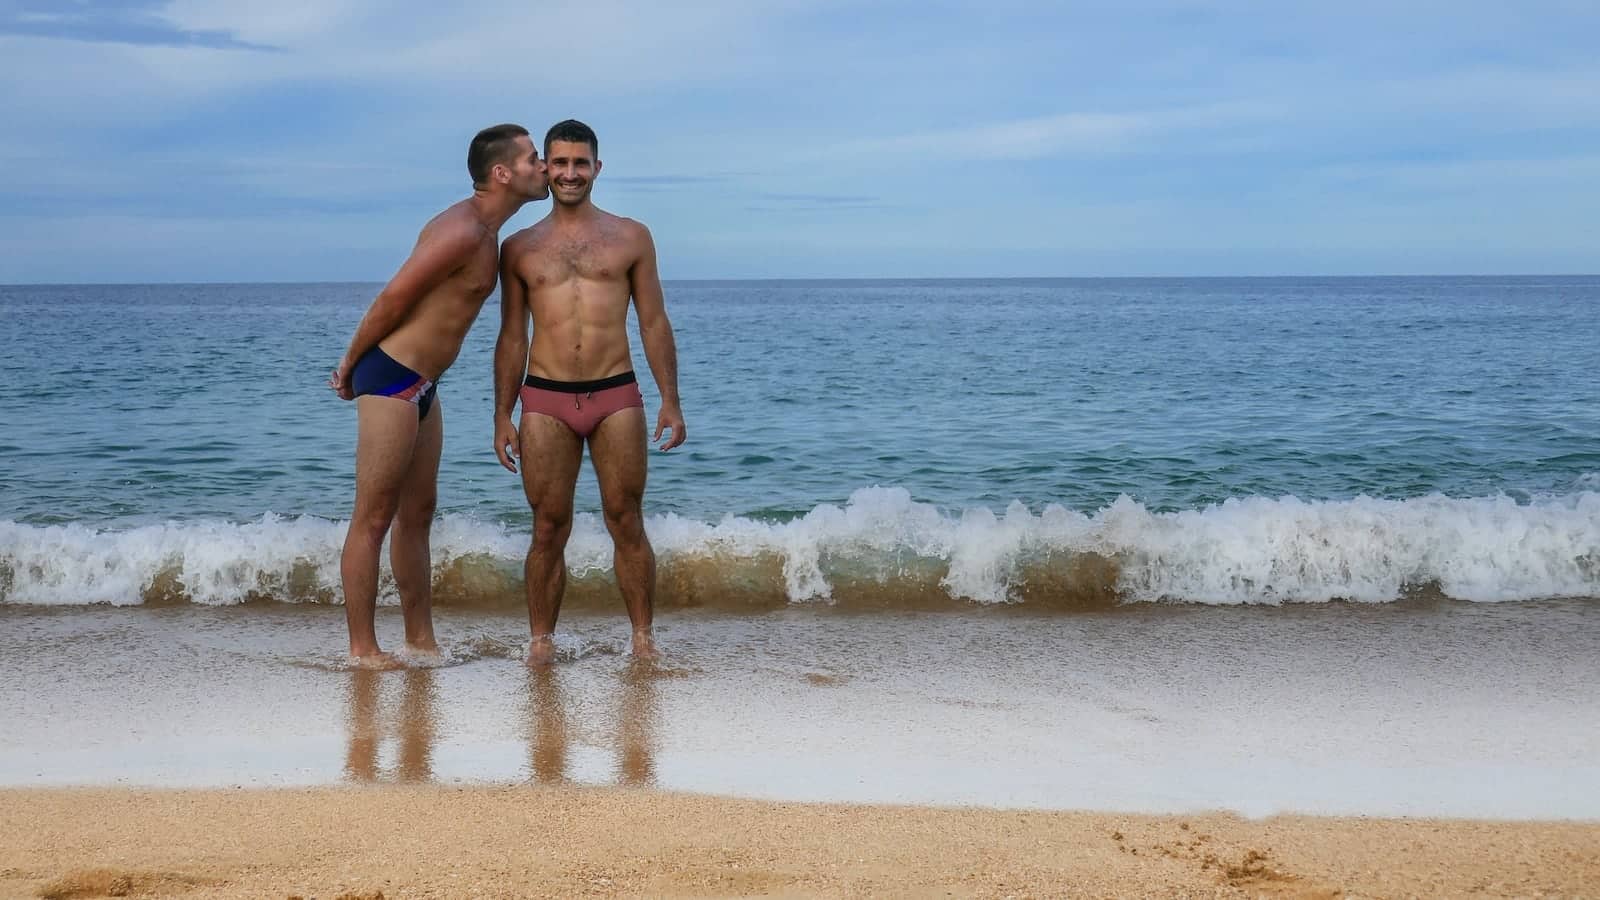 Ibiza has one of the best gay beaches in Europe